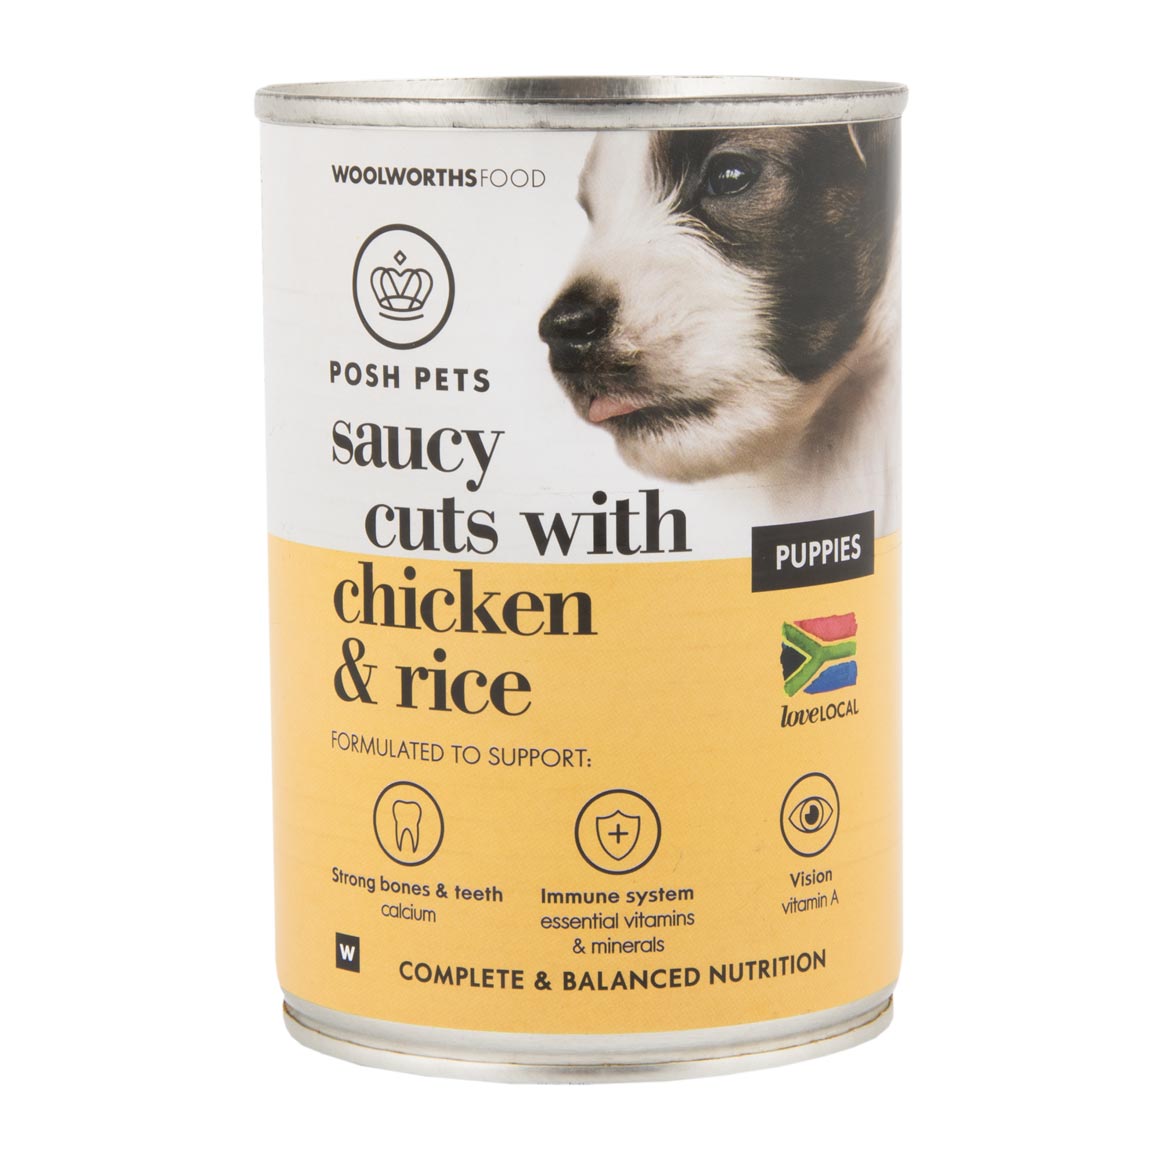 Posh Pets Saucy Cuts with Chicken and Rice Puppy Food 385 g ...